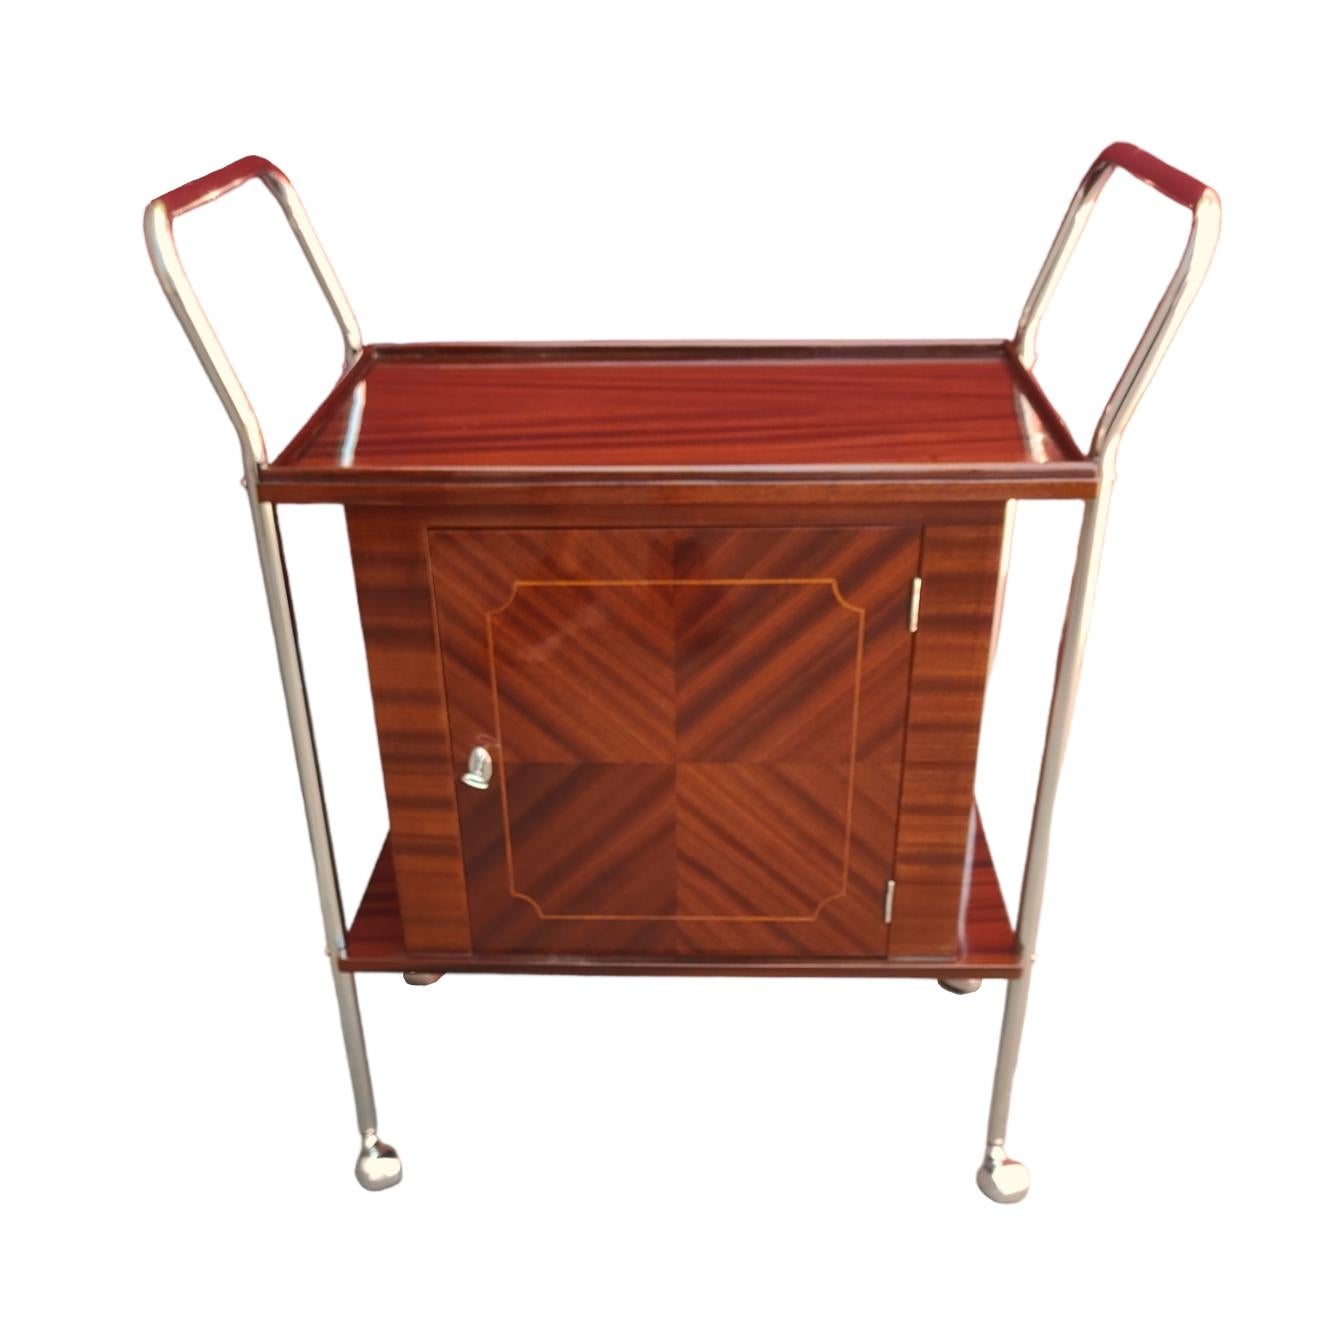 Art Deco Rolling Bar Cart

This Art Deco Rolling Bar Cart is both practical and beutiful.  Able to be moved into place , pushed by its handles and rolled on chrome casters Exceptional veneer work highlights a checkerboard pattern in the wood grain